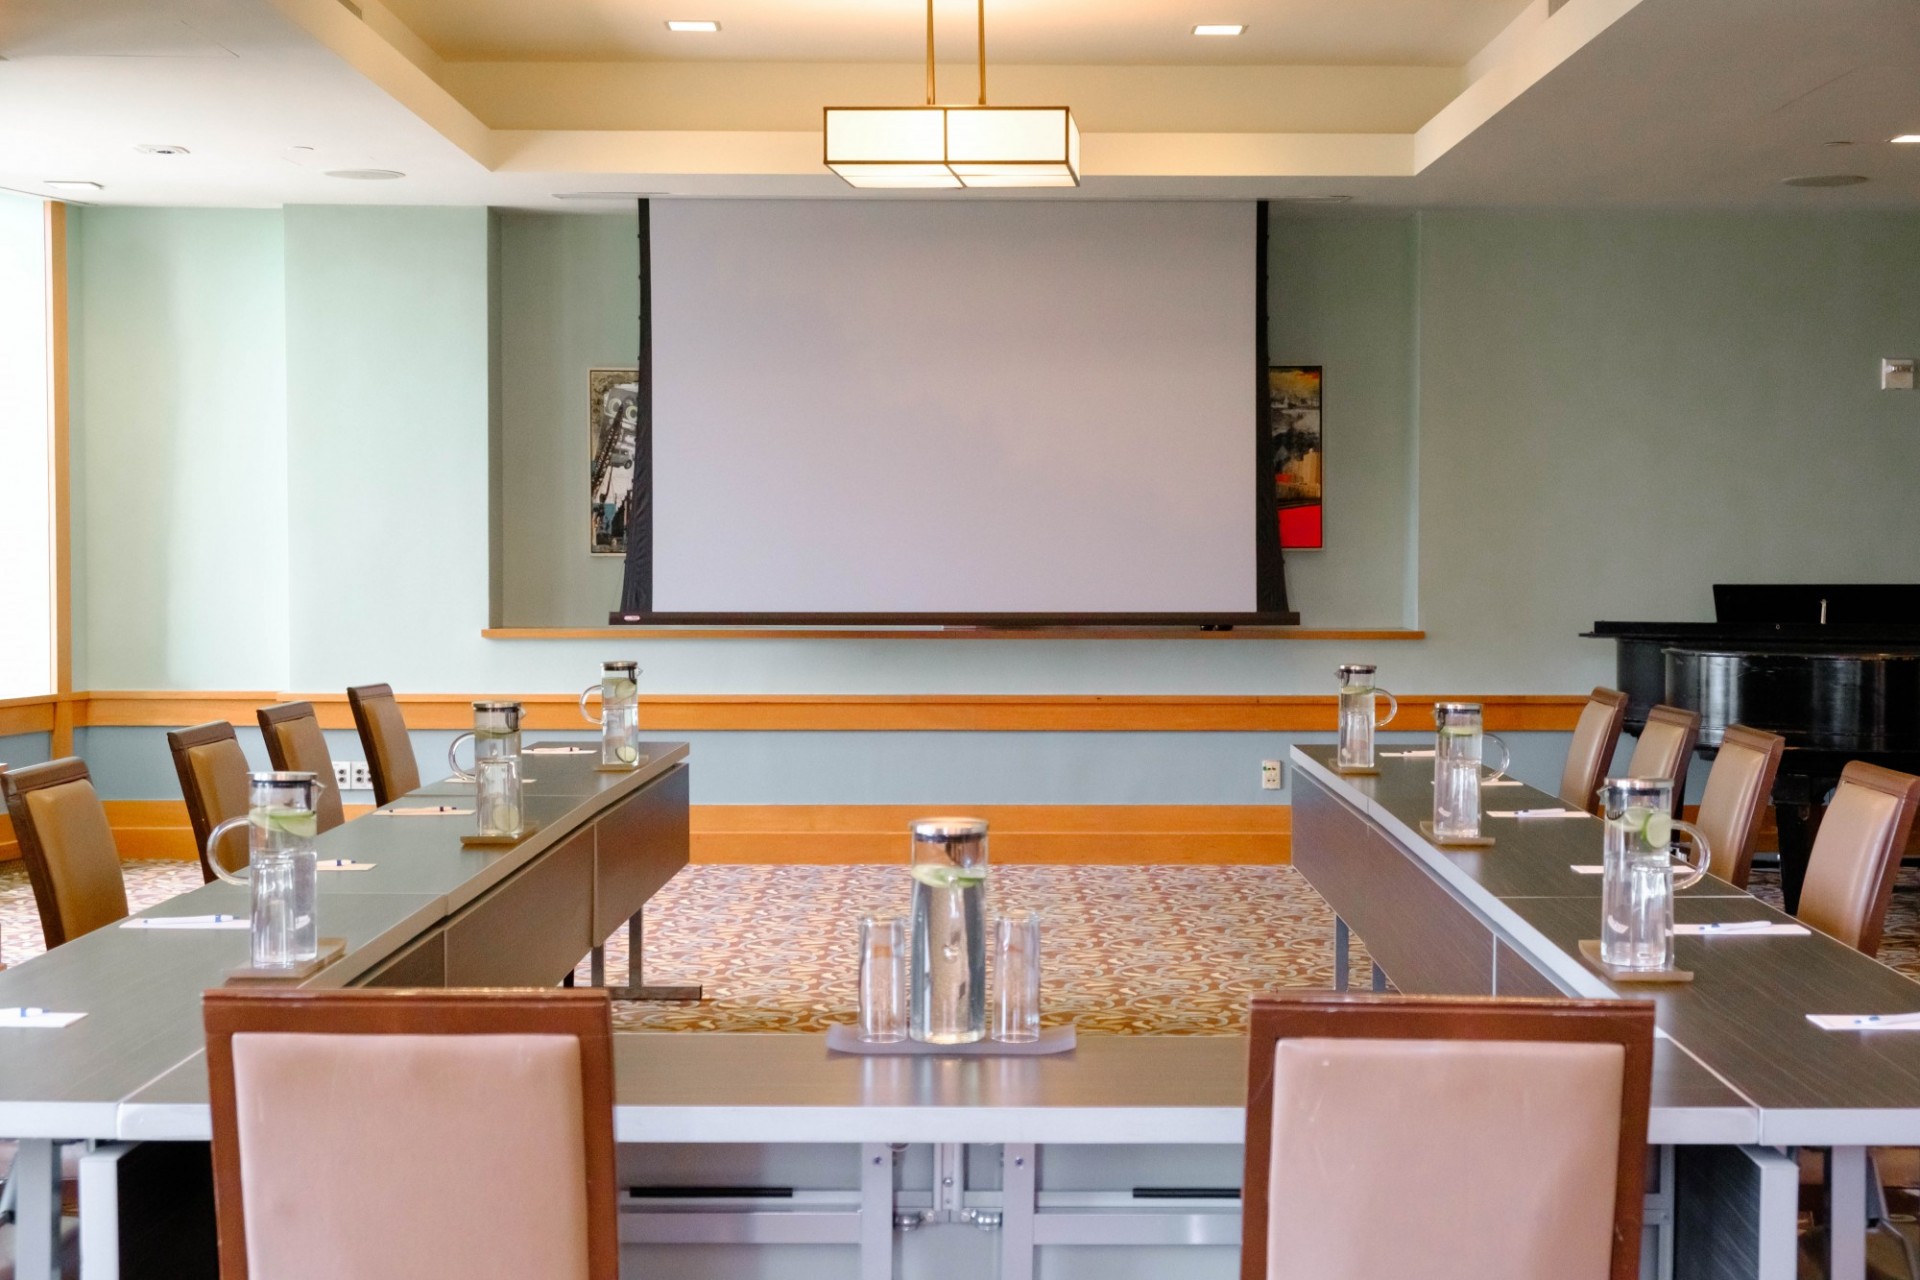 Tables in U formation face a projector screen in Garden Room 2